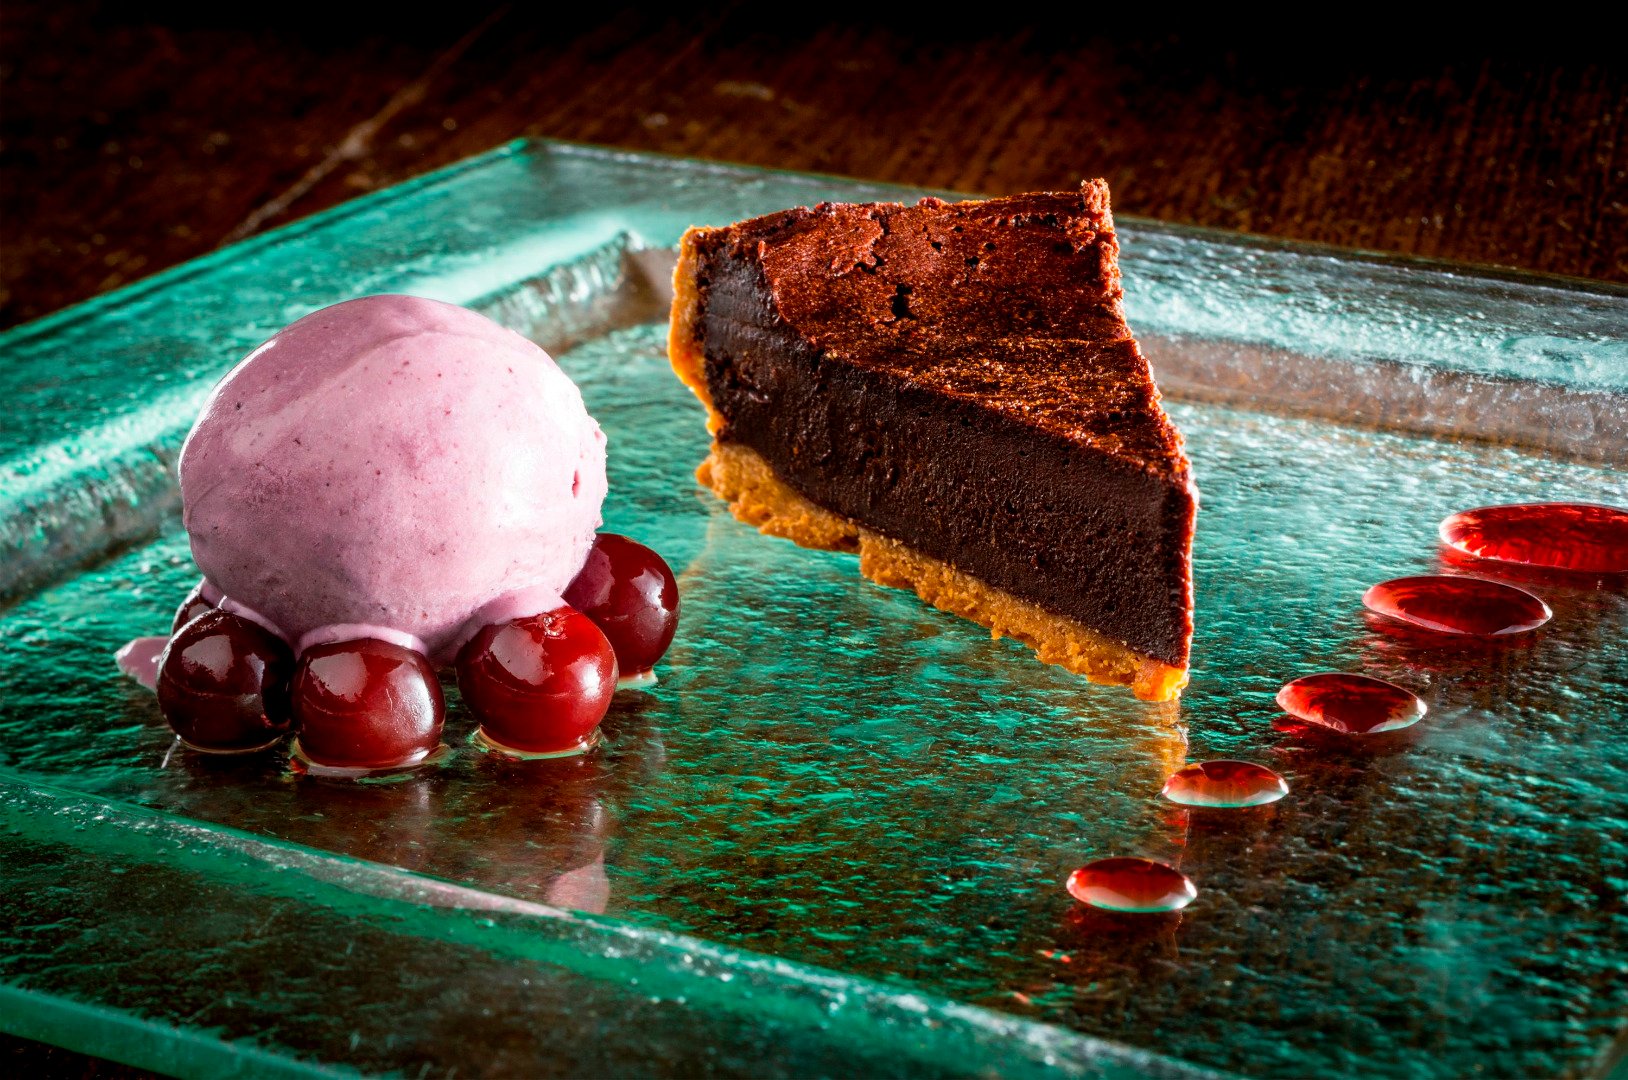 Image name homemade chocolate tart with cherry ice cream cherries the blue lion inn east witton the good pub guide inn of the year 20141 the 6 image from the post Eating out in the Yorkshire Dales in Yorkshire.com.